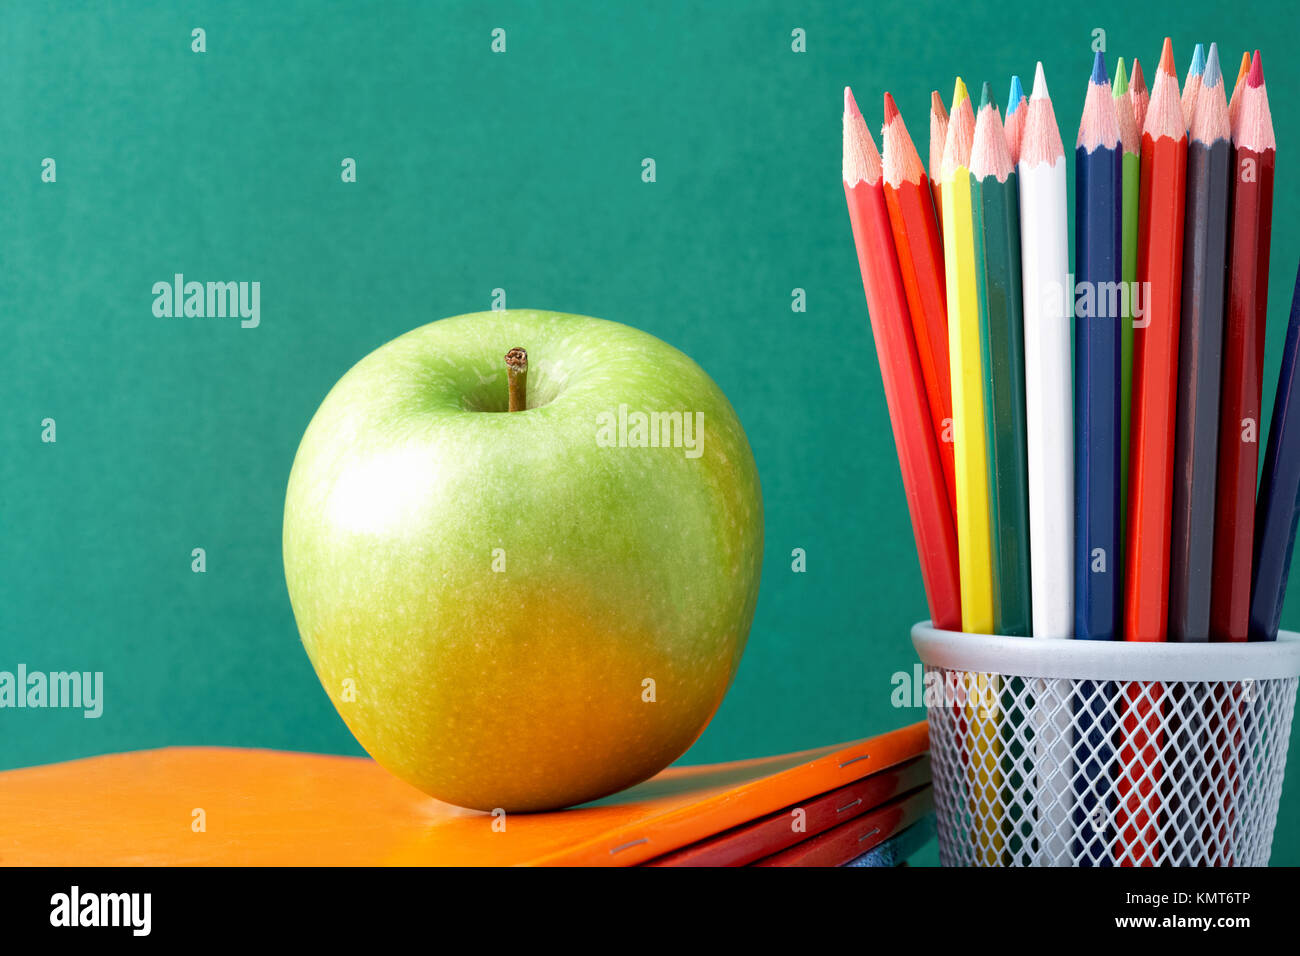 Image of crayons and green apple against blackboard Stock Photo